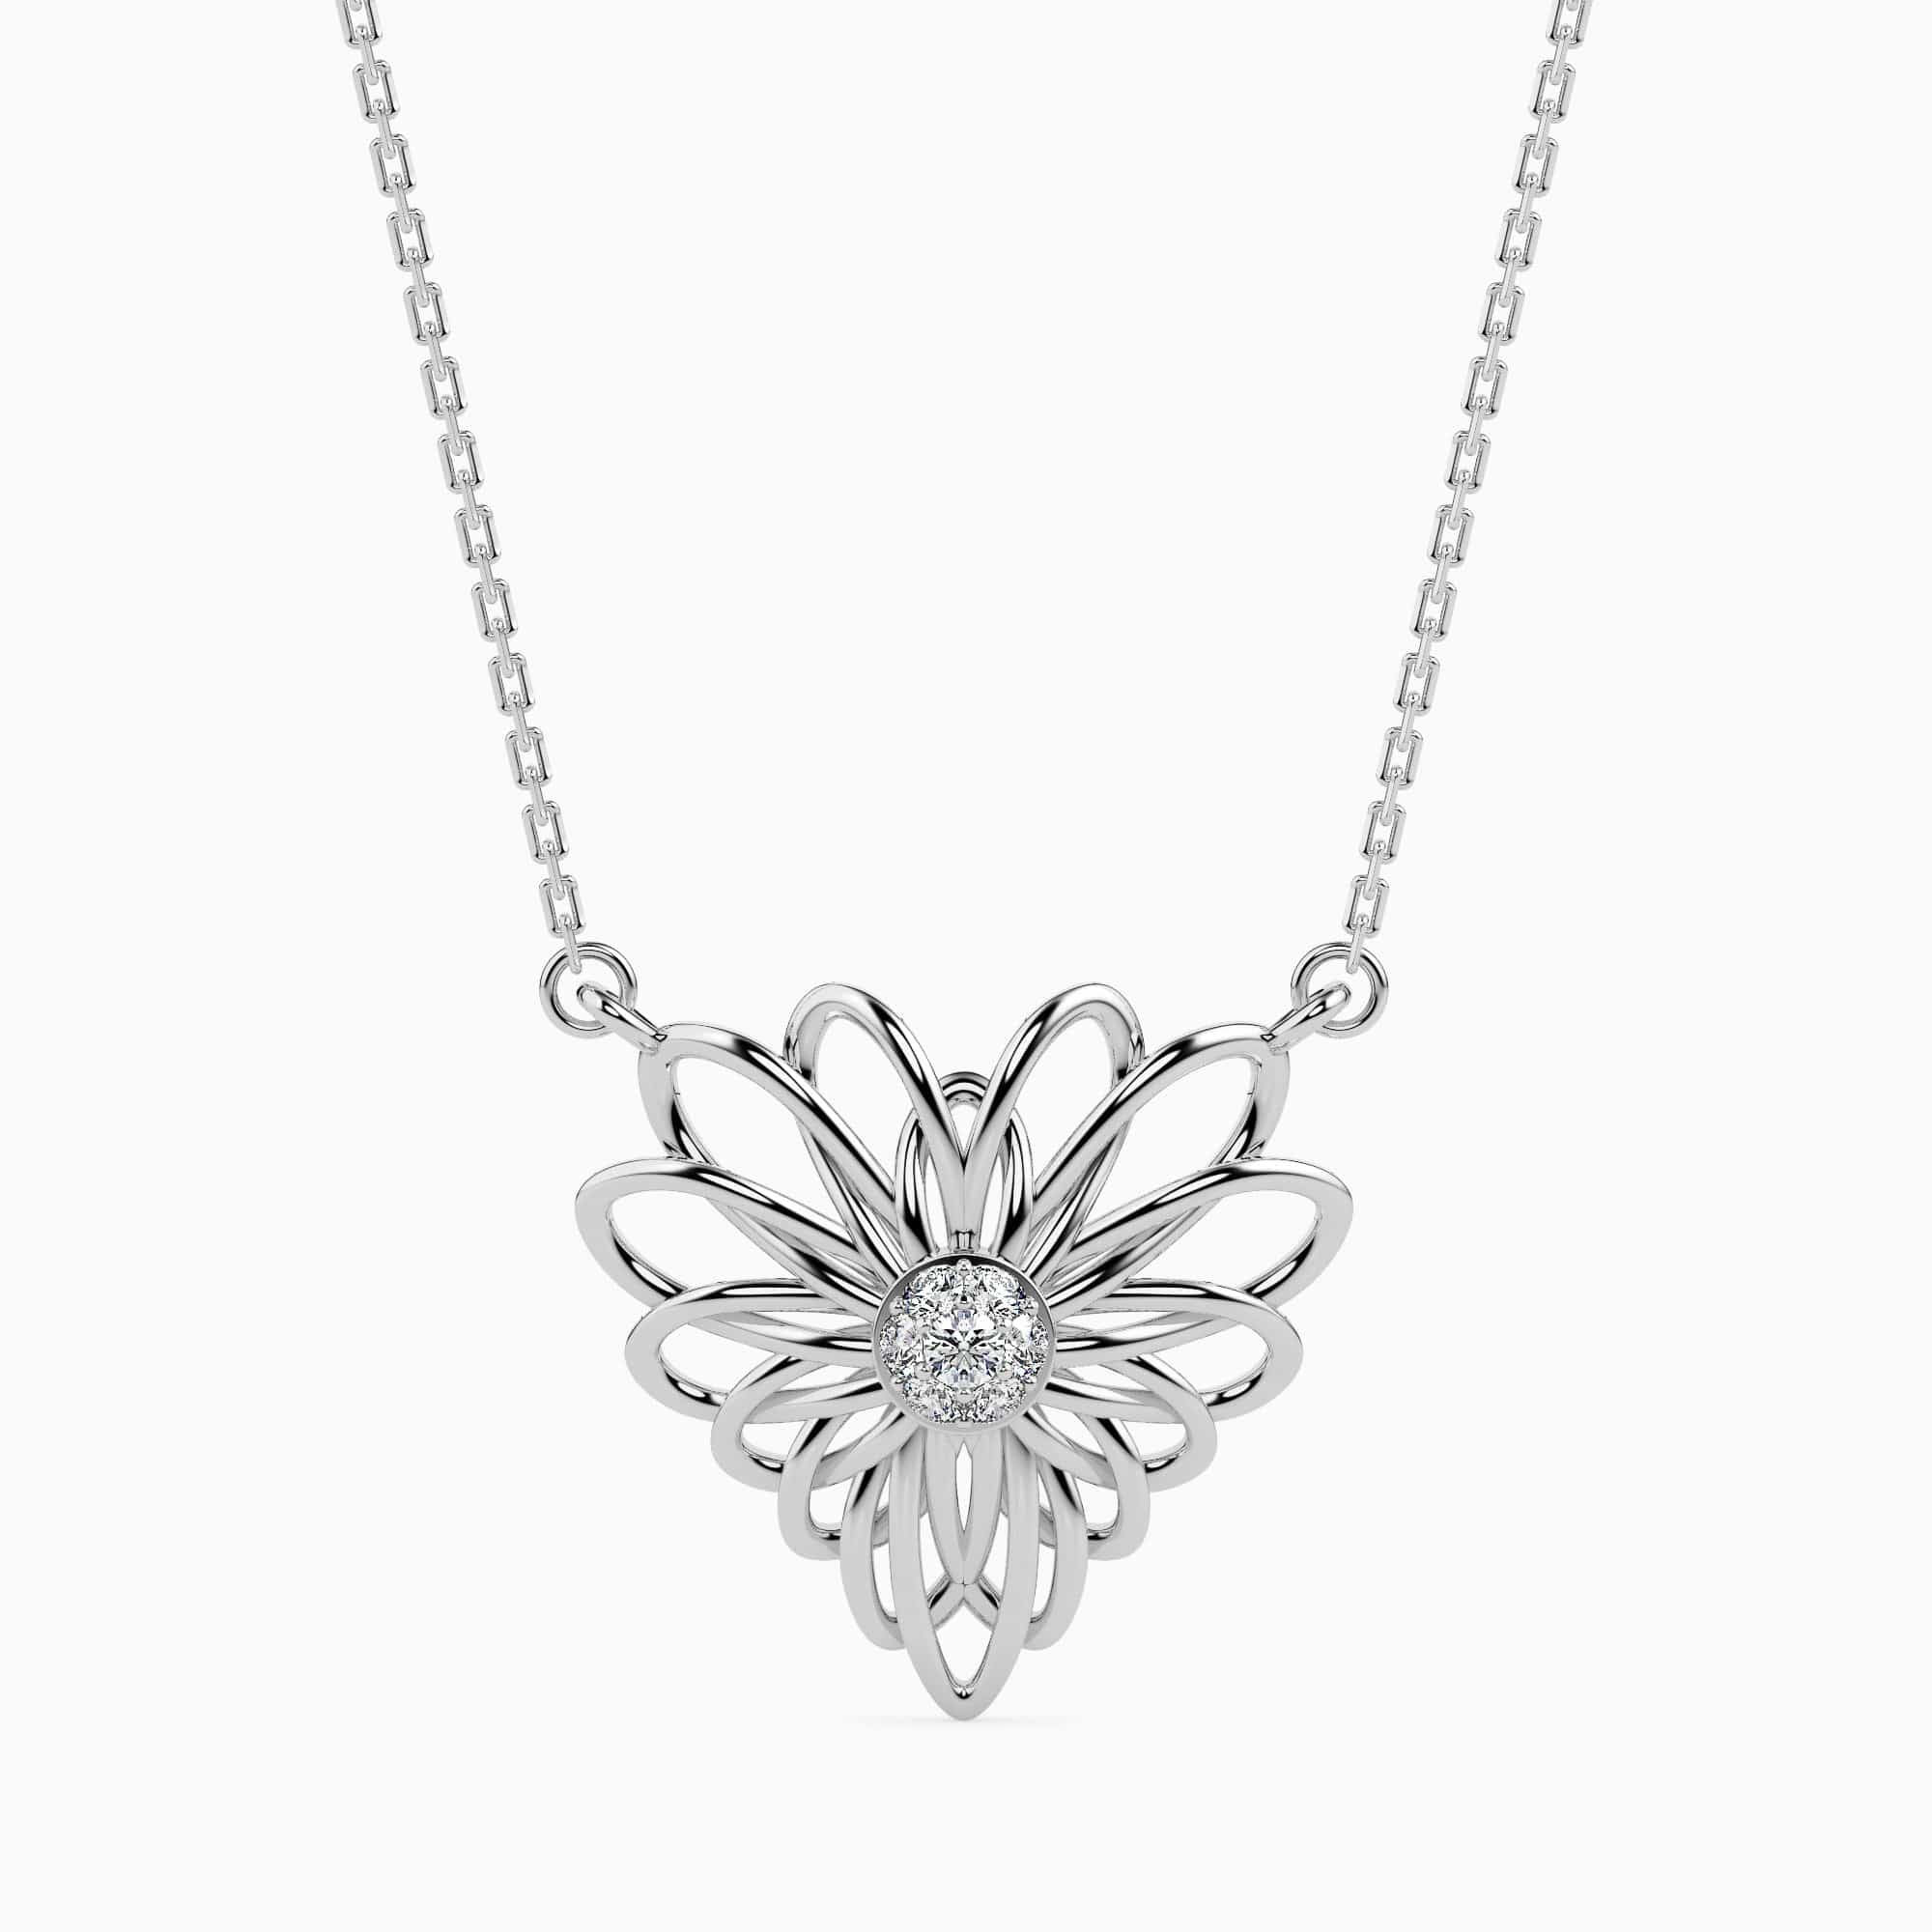 Flower With Ball In Diamond New Style Silver Color Necklace For Women -  Style Lnka027 at Rs 200.00 in Rajkot | ID: 26090952612